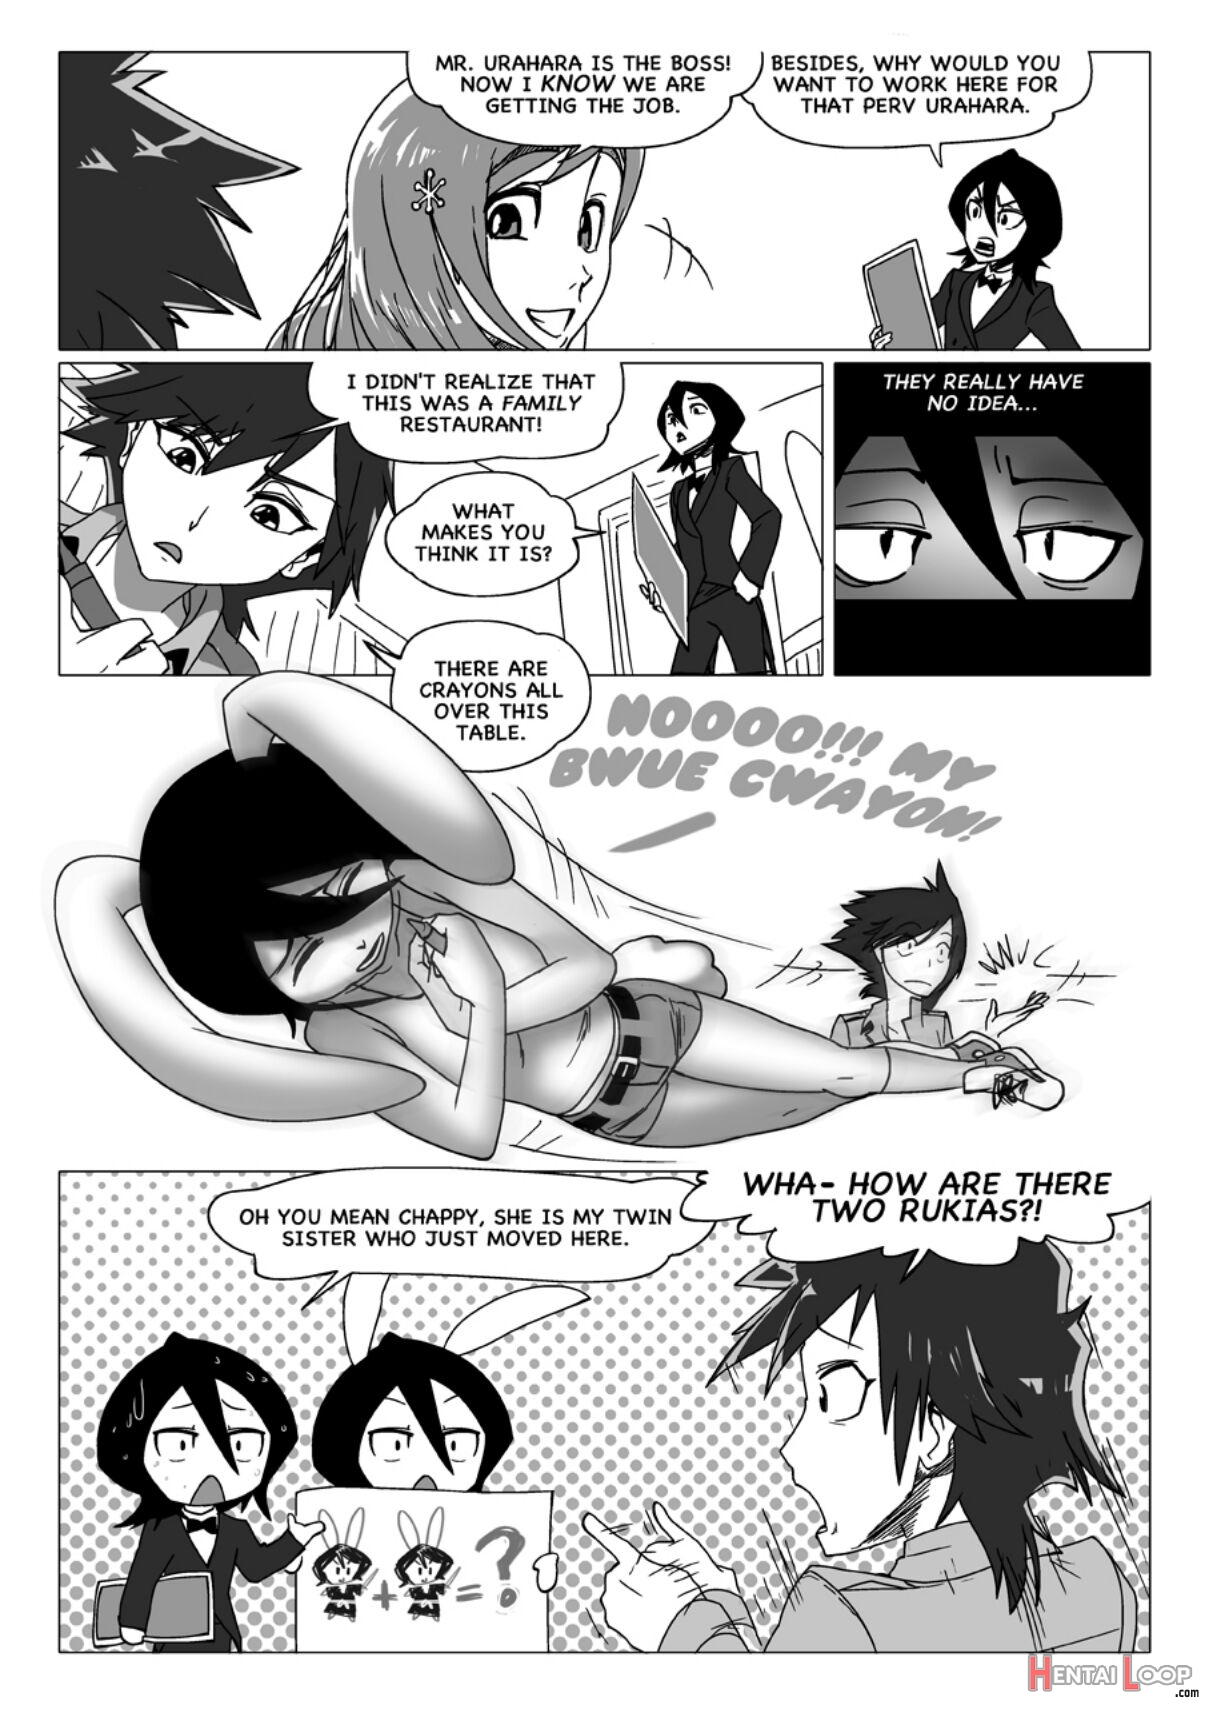 Happy To Serve You - Xxx Version page 36